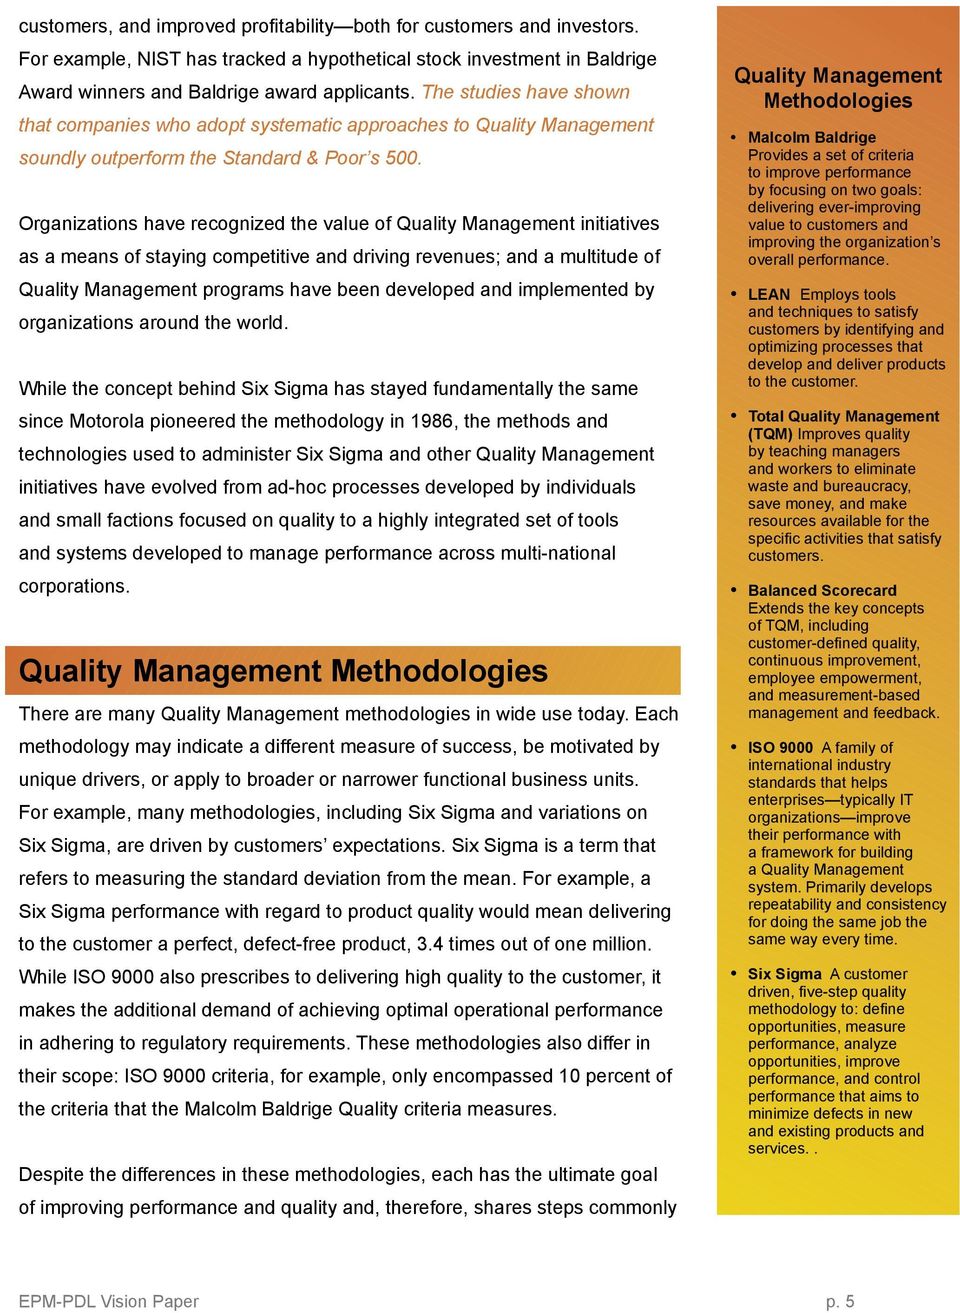 Organizations have recognized the value of Quality Management initiatives as a means of staying competitive and driving revenues; and a multitude of Quality Management programs have been developed